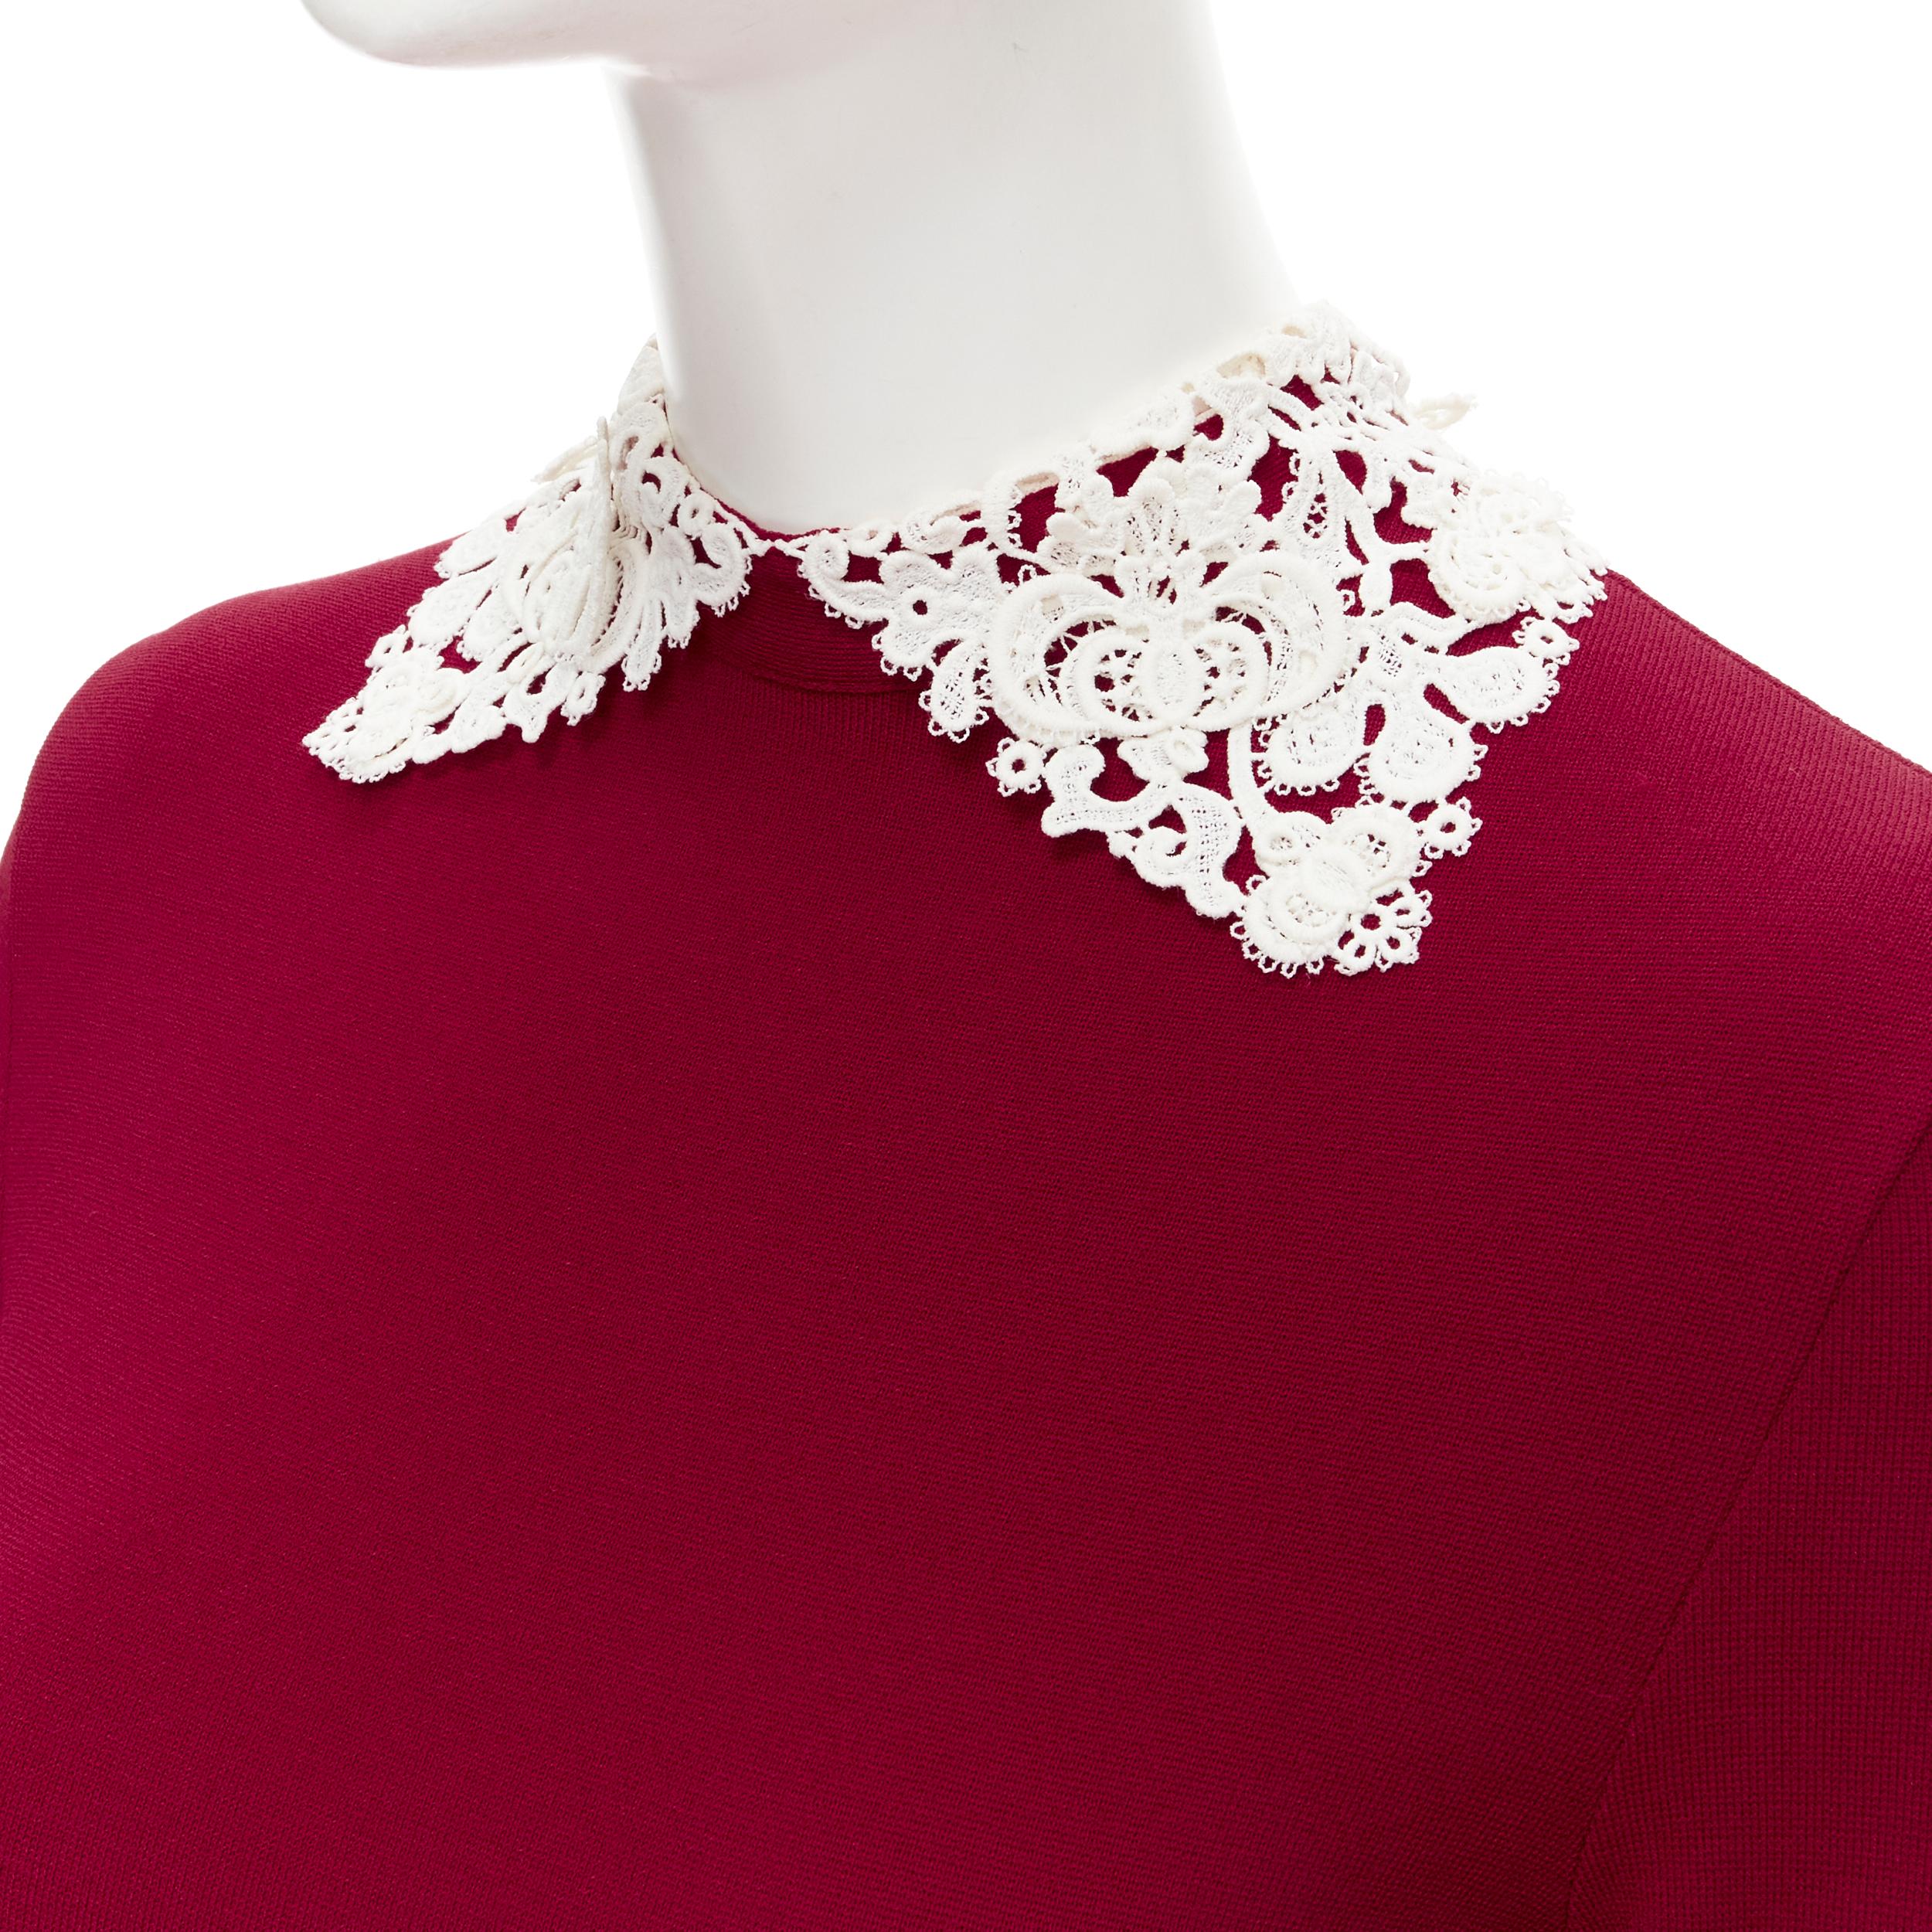 VALENTINO red knitted white lace collar bodycon sheath dress S 
Reference: MELK/A00097 
Brand: Valentino 
Material: Viscose 
Color: Red 
Pattern: Solid 
Closure: Zip 
Extra Detail: Fit dart at waist. 
Made in: Italy 

CONDITION: 
Condition: Good,